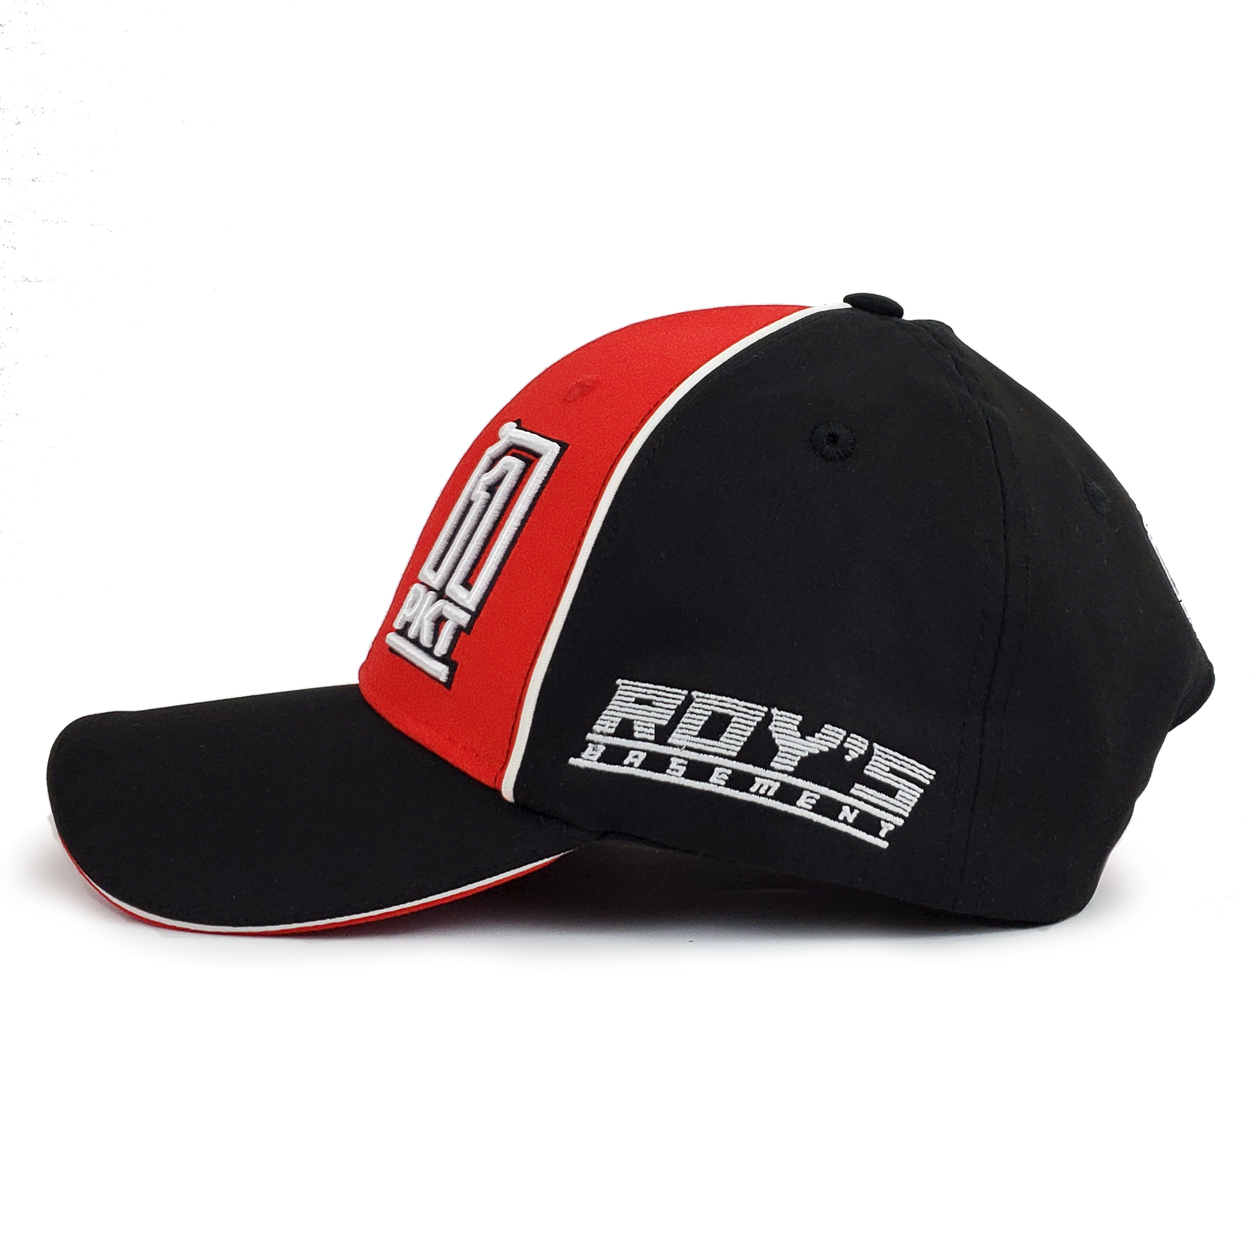 Roy's Basement x 1PKT Special Edition Curved Bill Hat - 1PKT